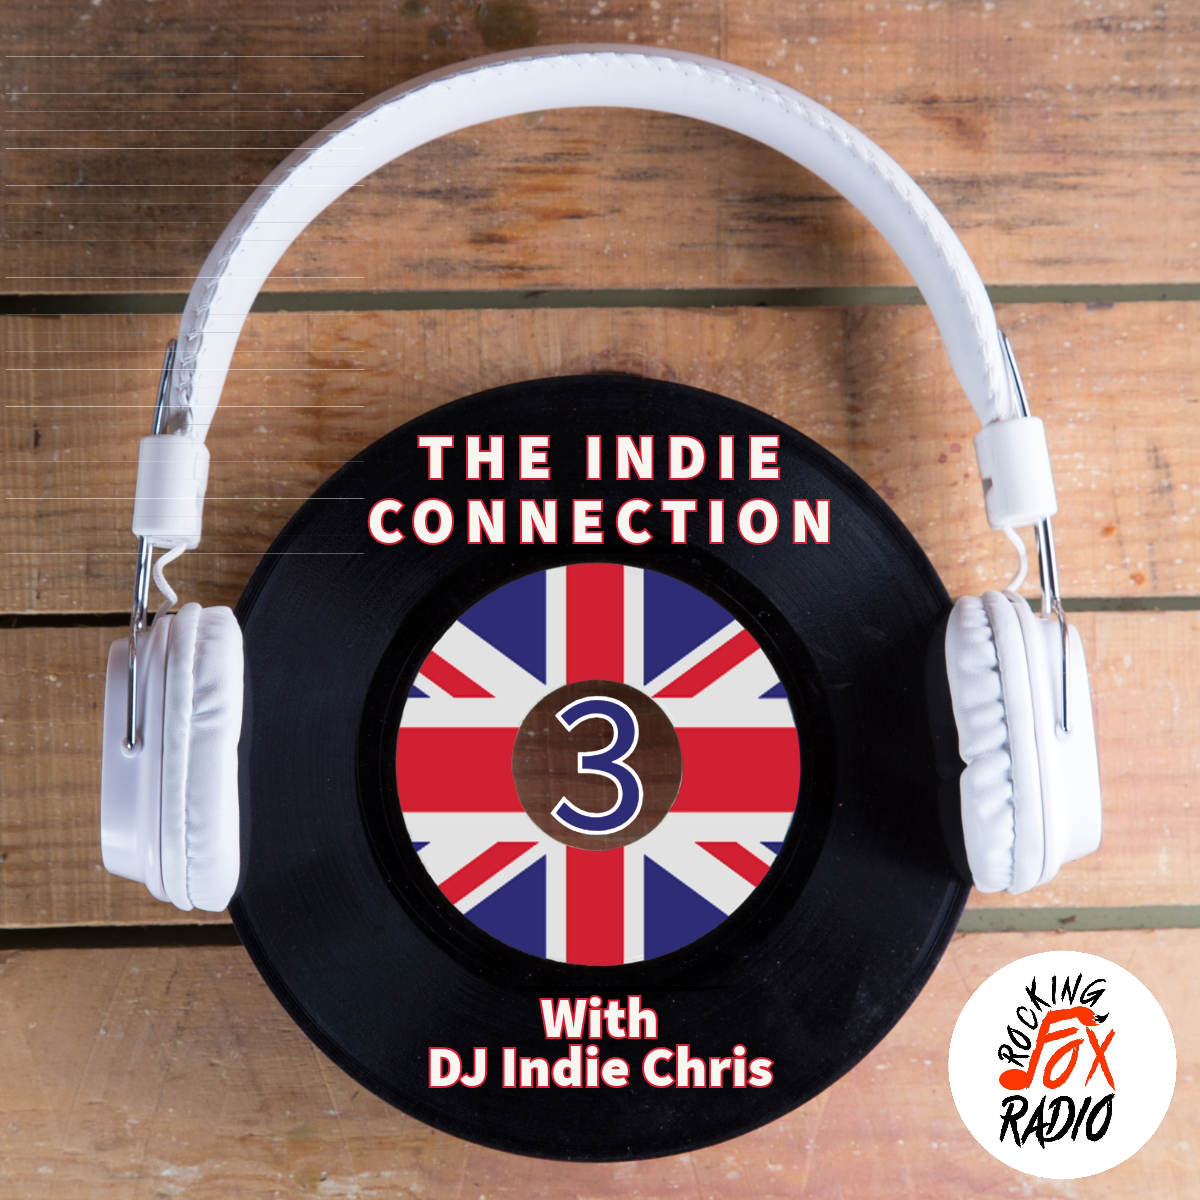 Episode 3 of The Indie Connection presented by @indiechris78 now on Mixcloud - remember you can listen LIVE every Wednesday night @ 8pm only on @rockingfoxradio ! mixcloud.com/RockingFoxRadi…